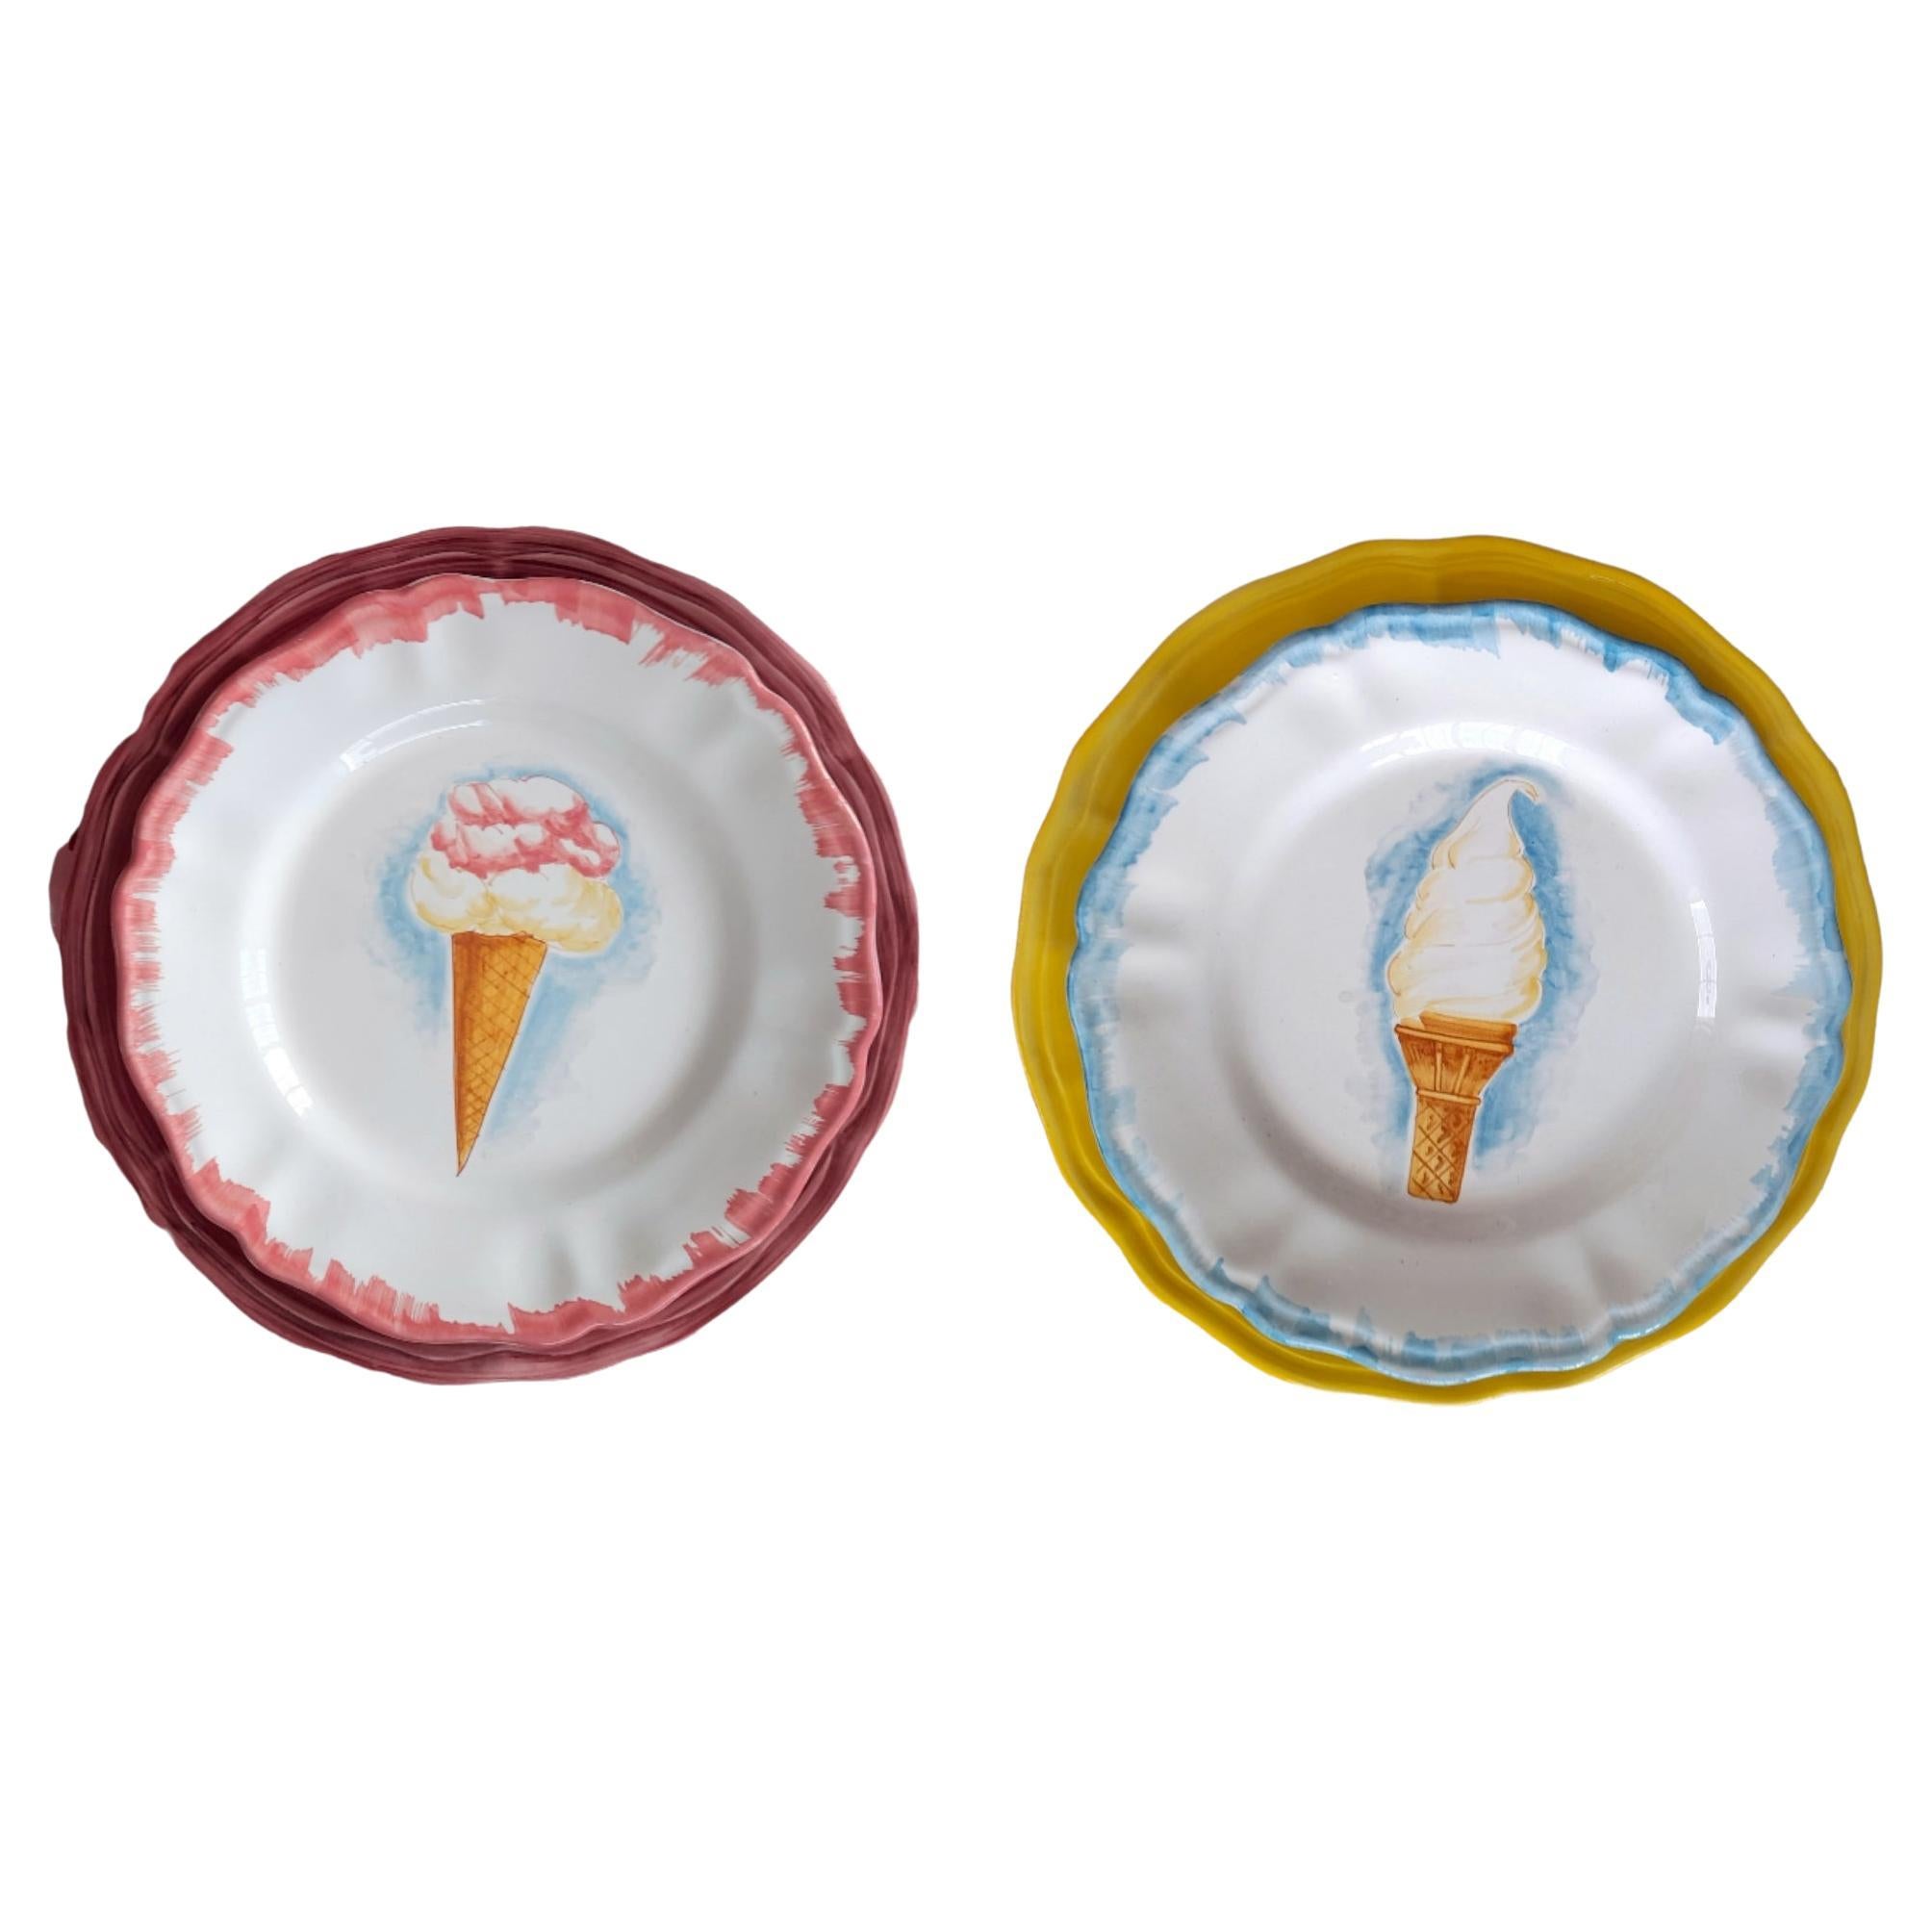 Ice Cream Handpainted Ceramic Plates, Made in Italy Set of 2 For Sale